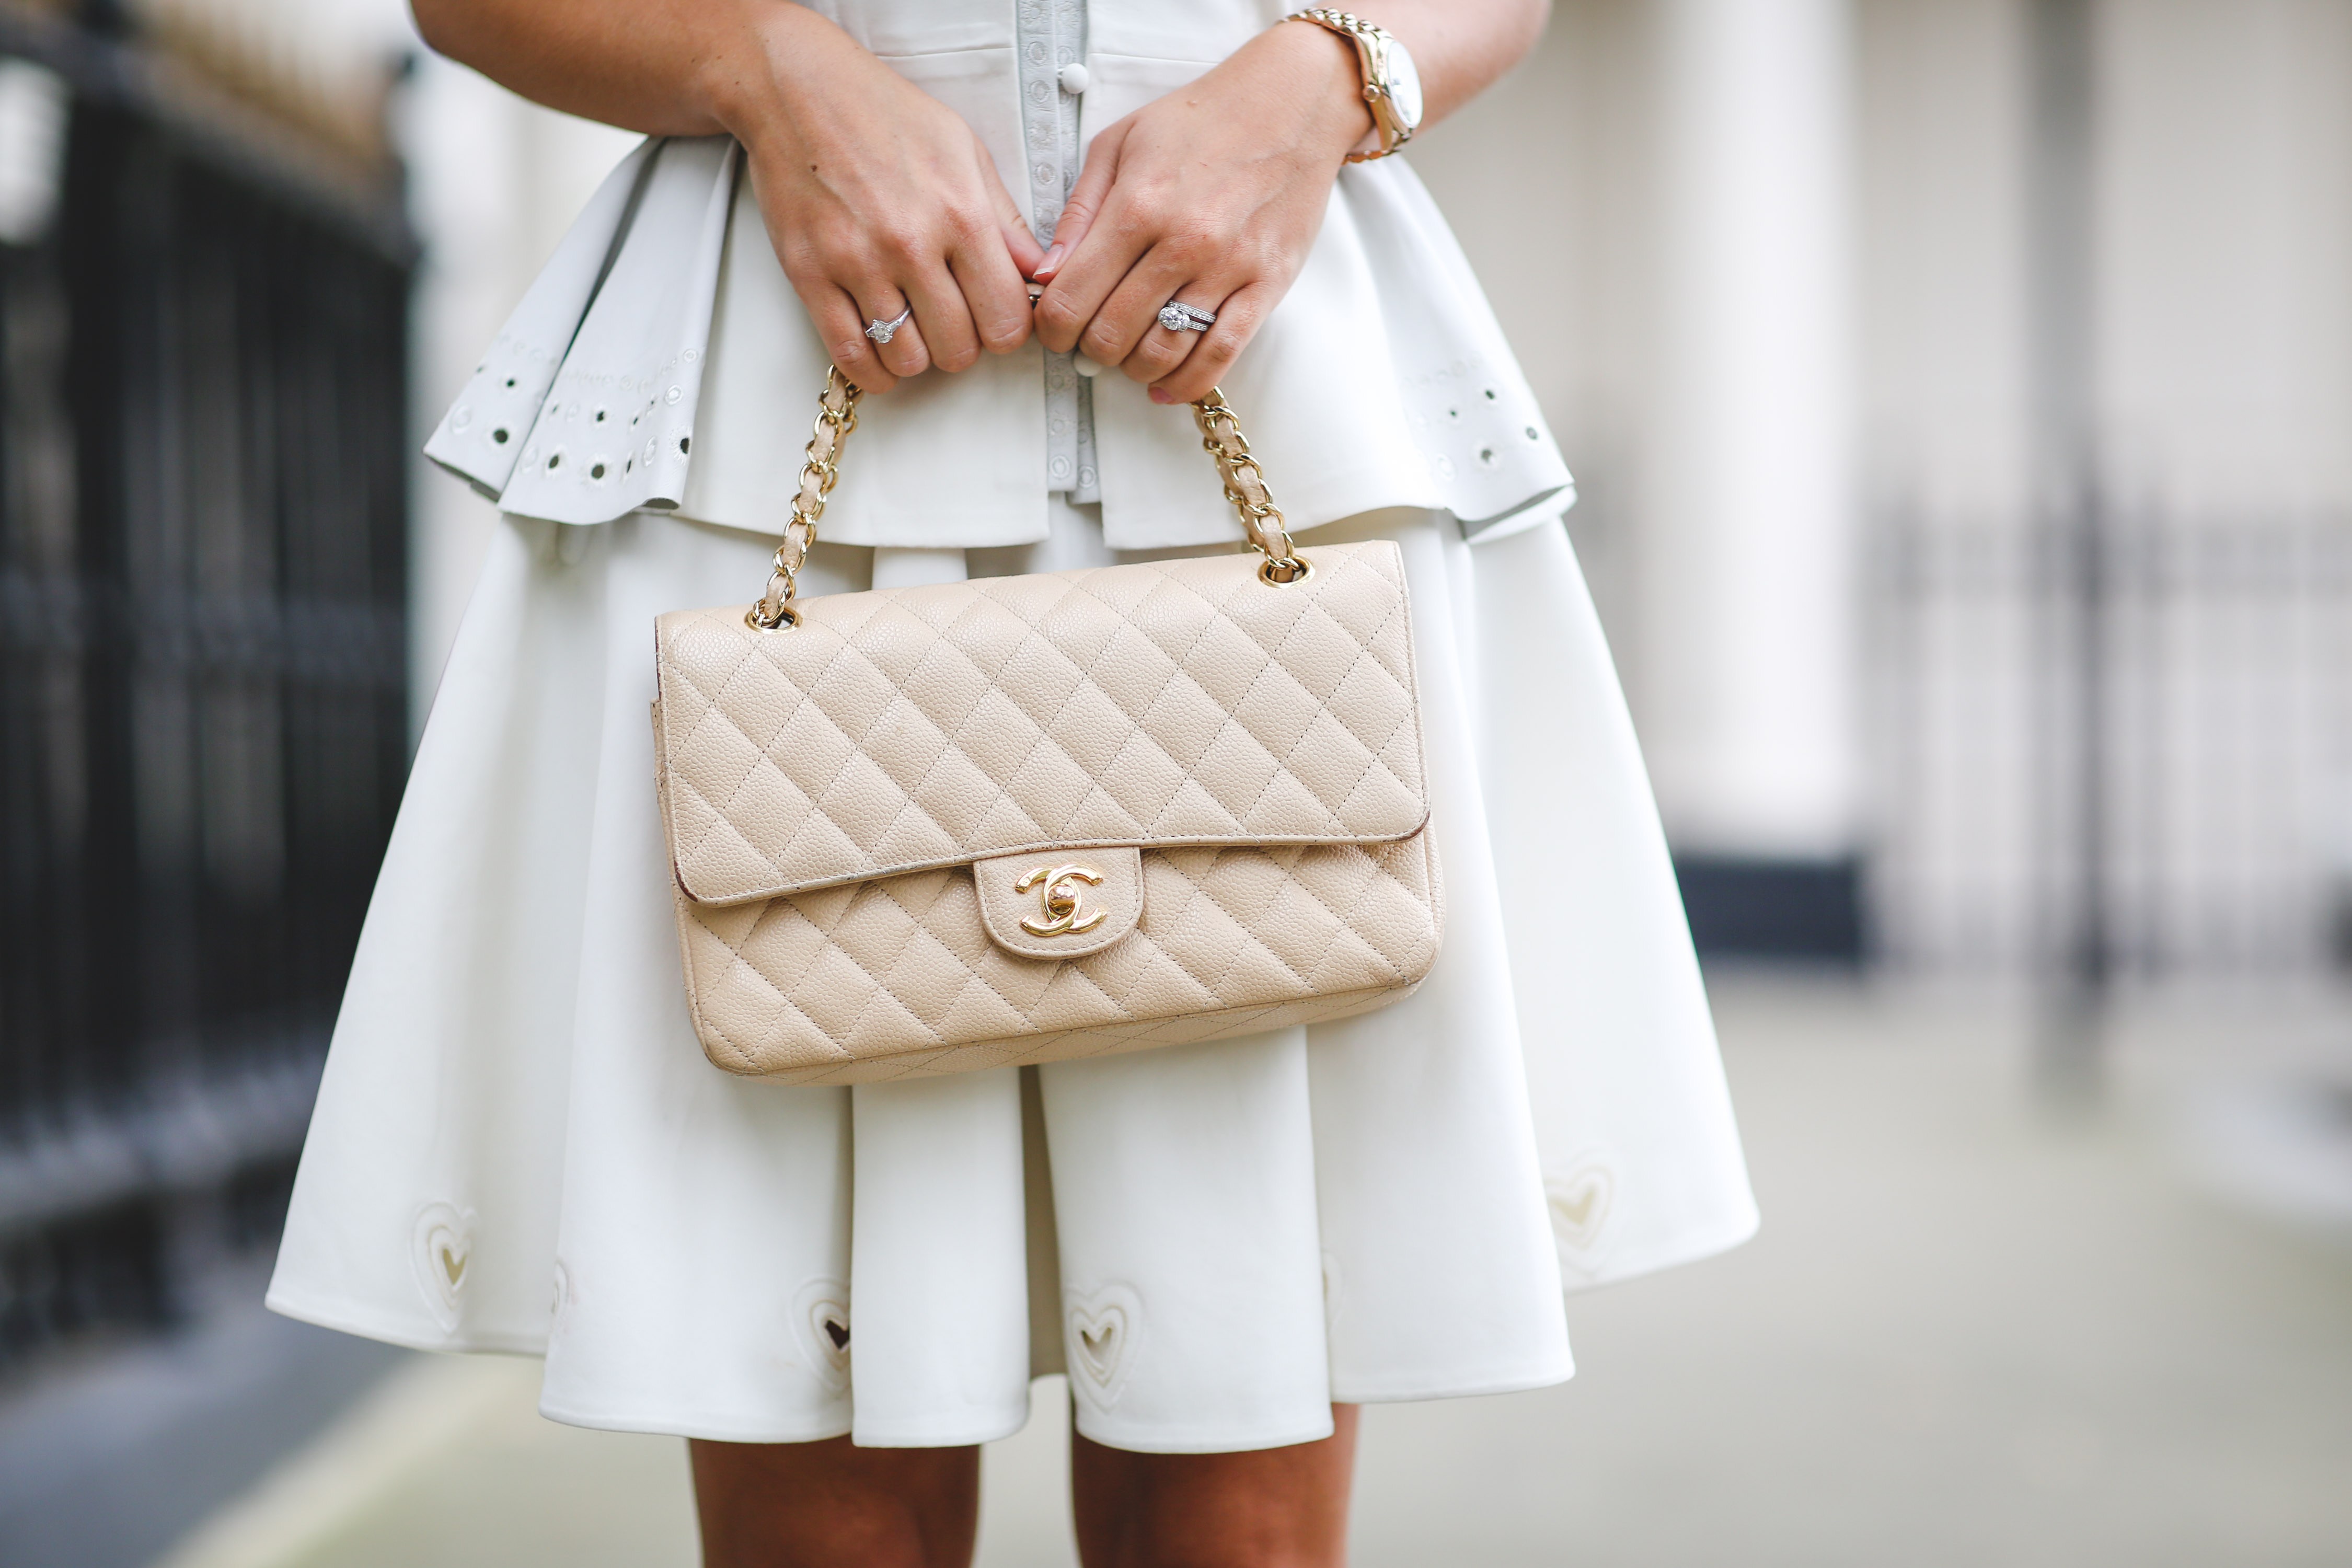 The History of The Chanel Flap Bag